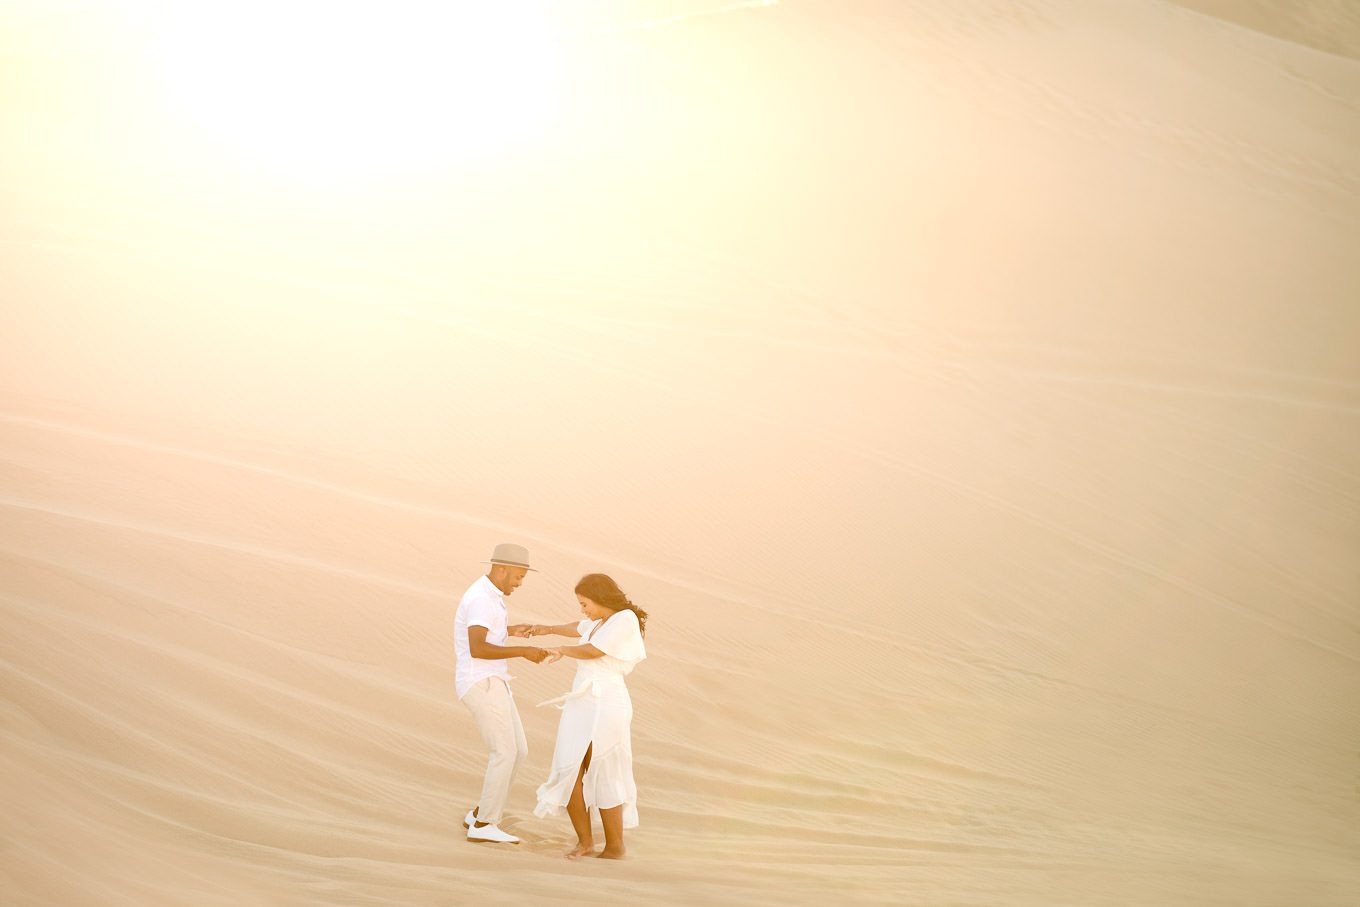 Engaged couple dance on sand dune | California Sand Dunes engagement session | Colorful Palm Springs wedding photography | #palmspringsphotographer #sanddunes #engagementsession #southerncalifornia  Source: Mary Costa Photography | Los Angeles